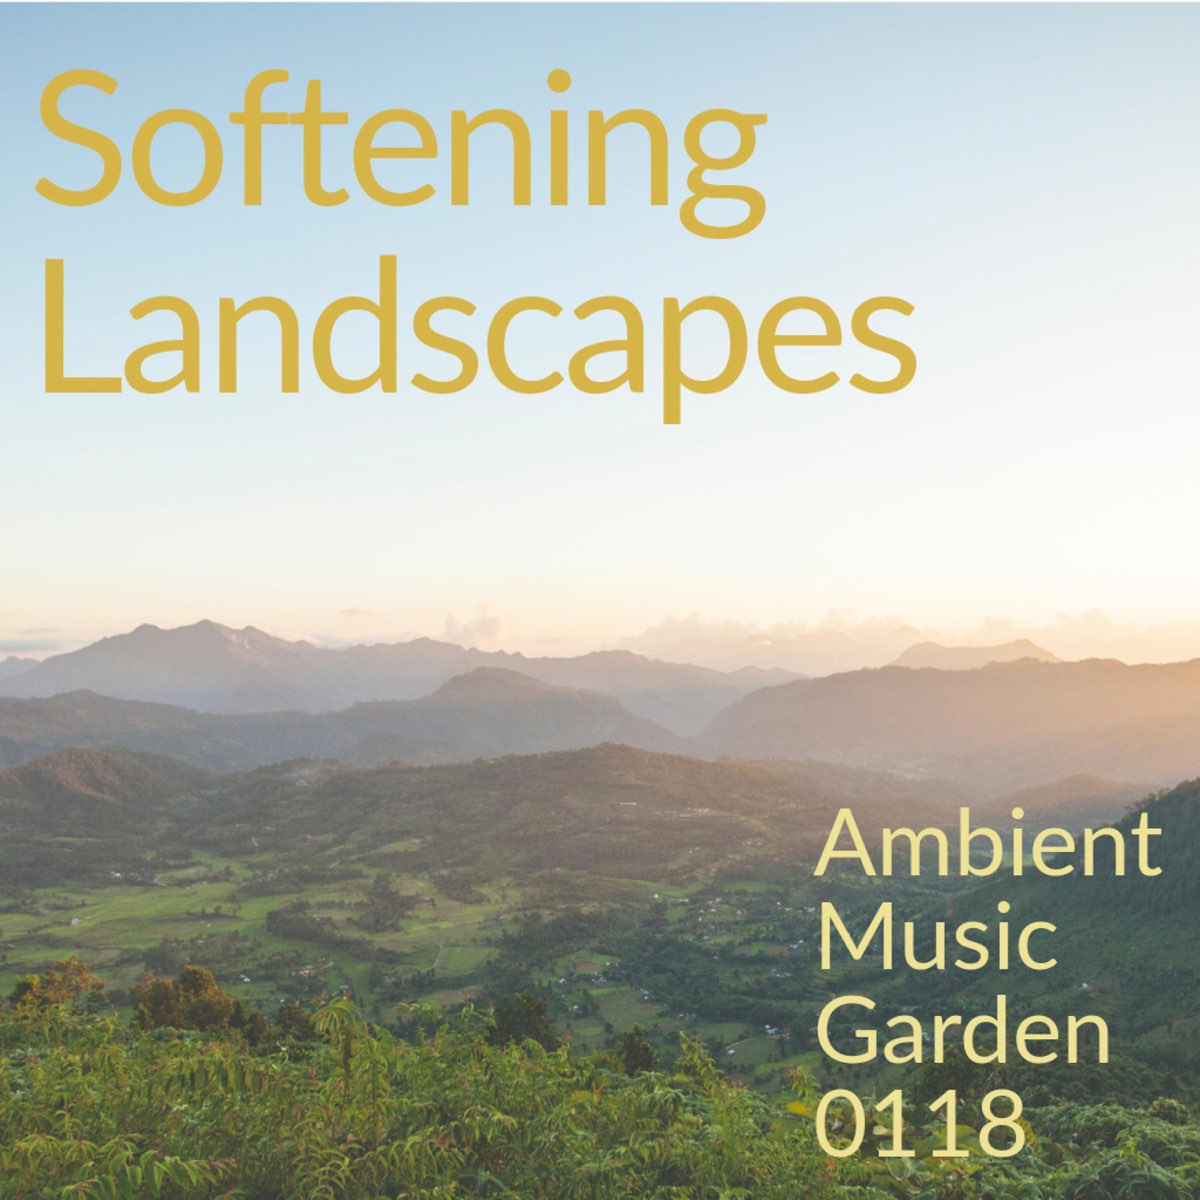 ‎Softening Landscapes - Album by Ambient Music Garden - Apple Music